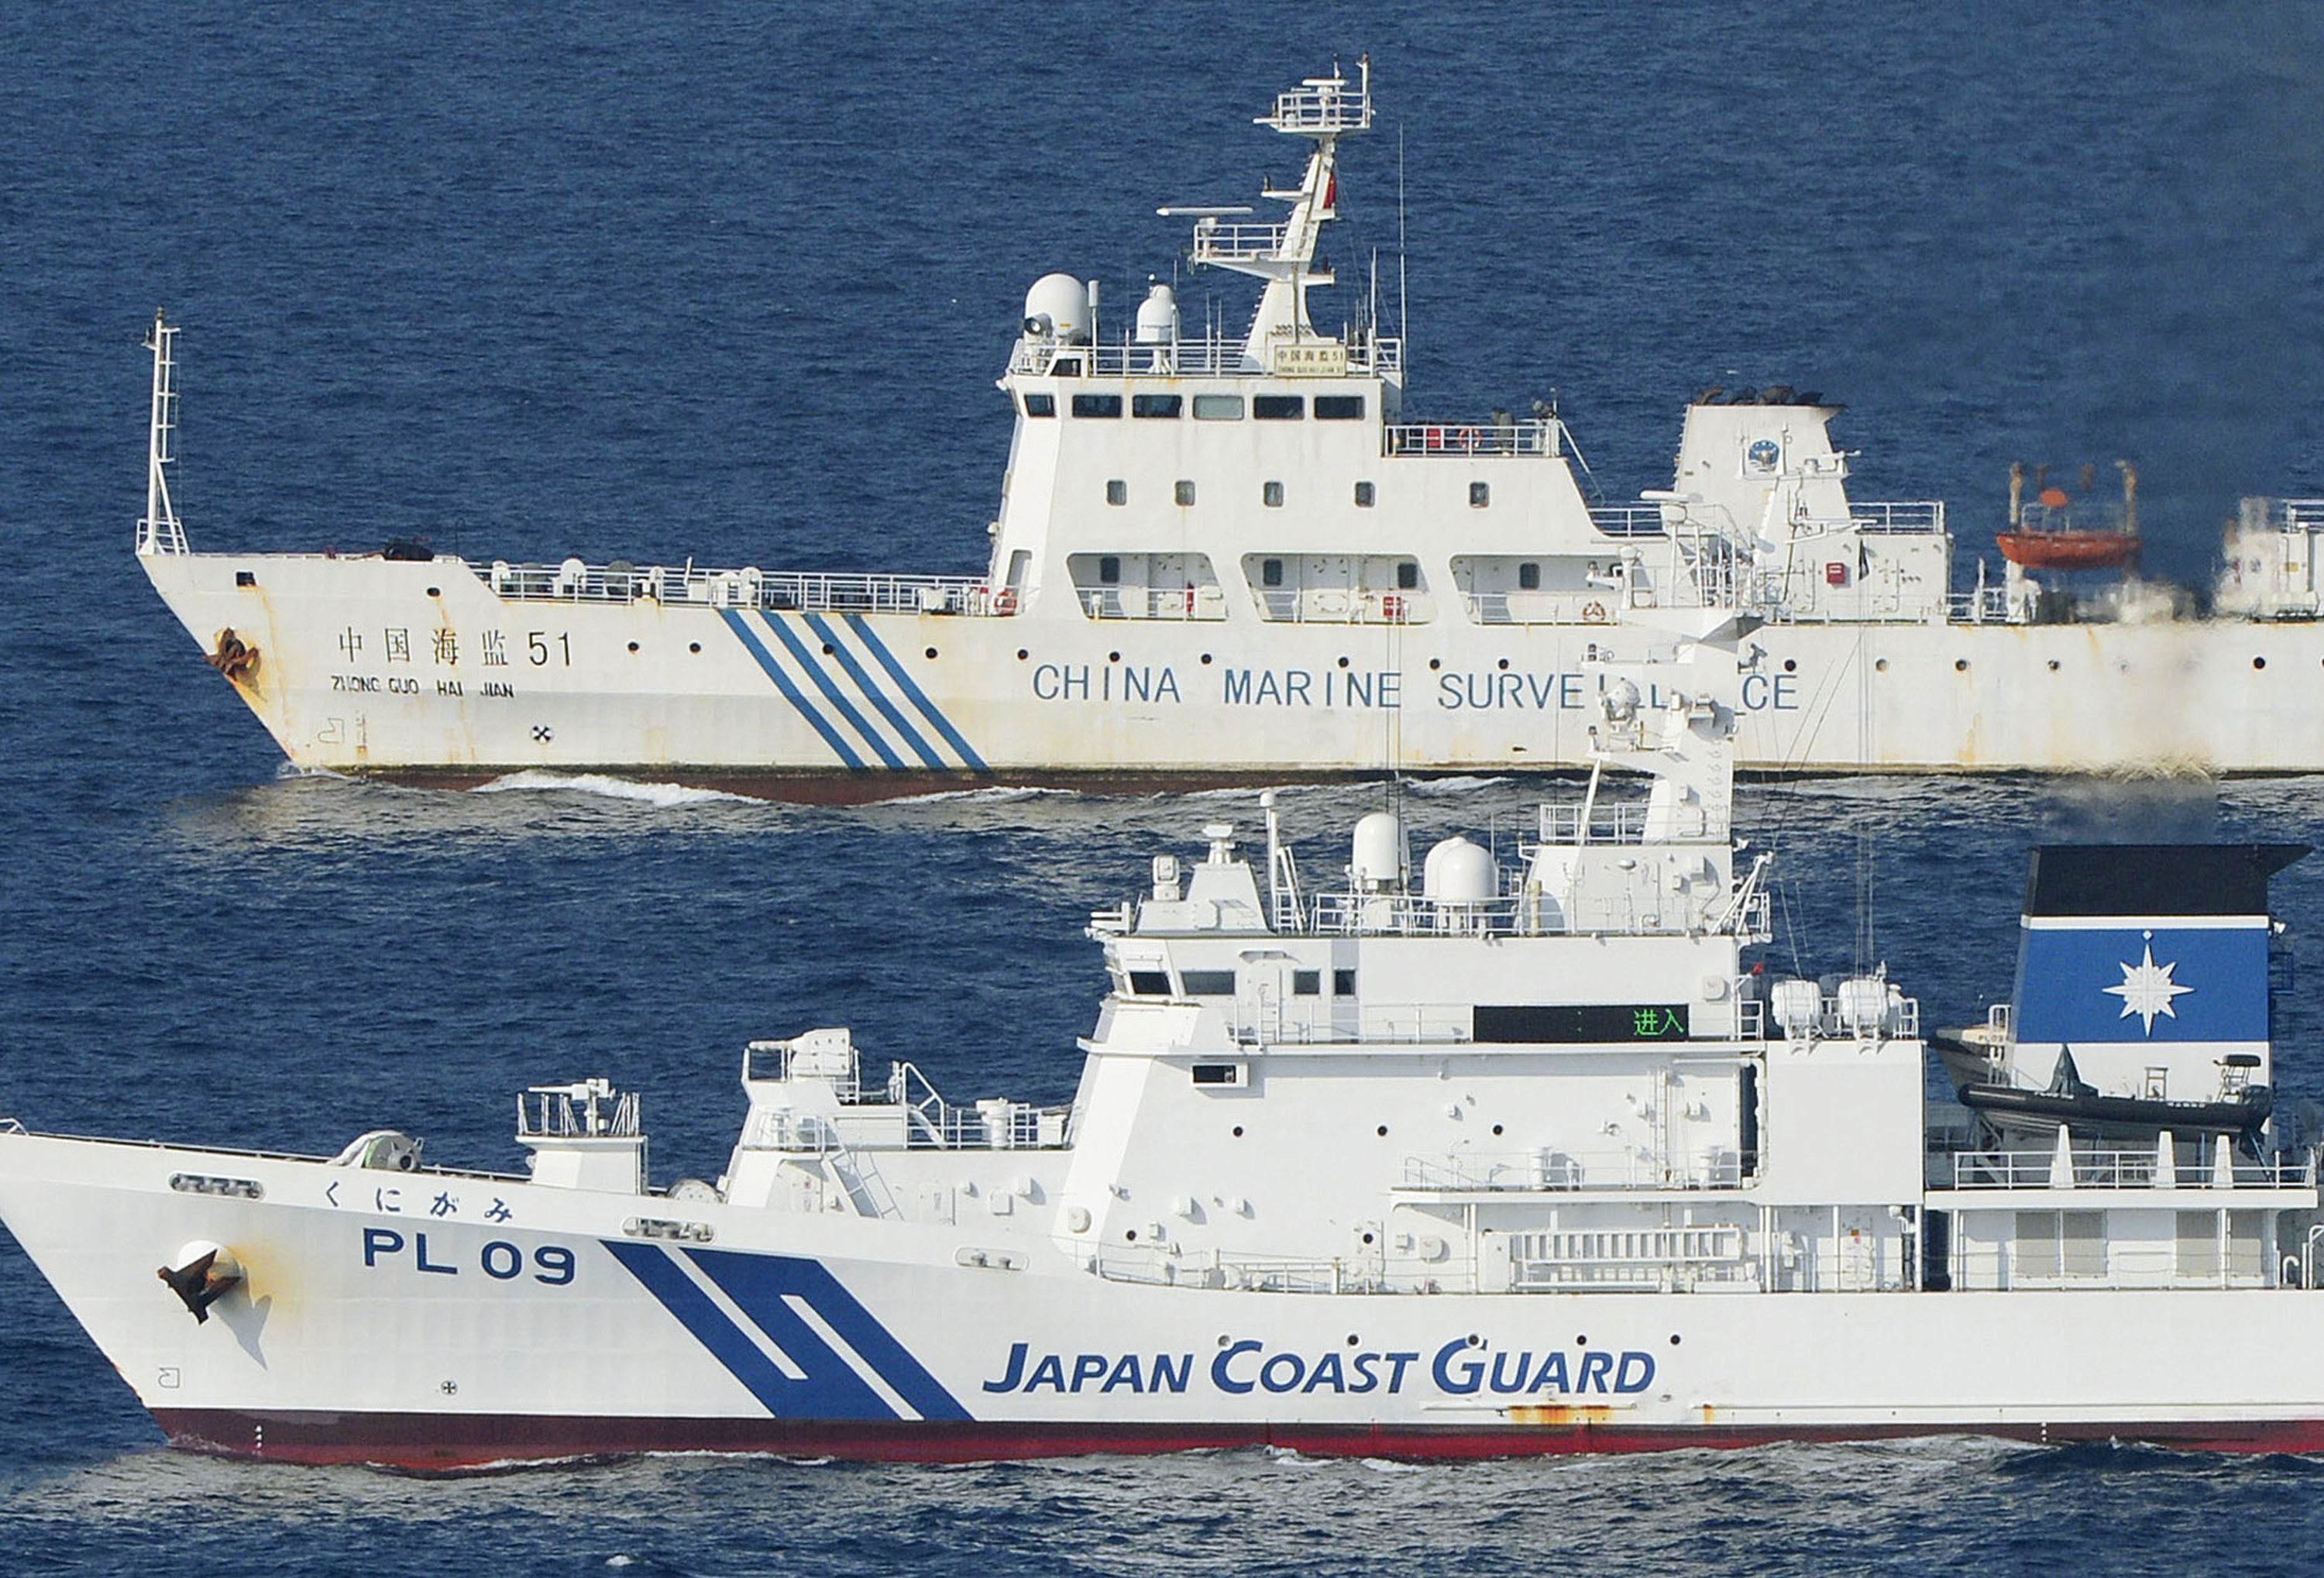 Chinese and Japanese coast guard vessels steam side by side near disputed East China Sea islands called Senkaku in Japan and Diaoyu in China. Photo: AP